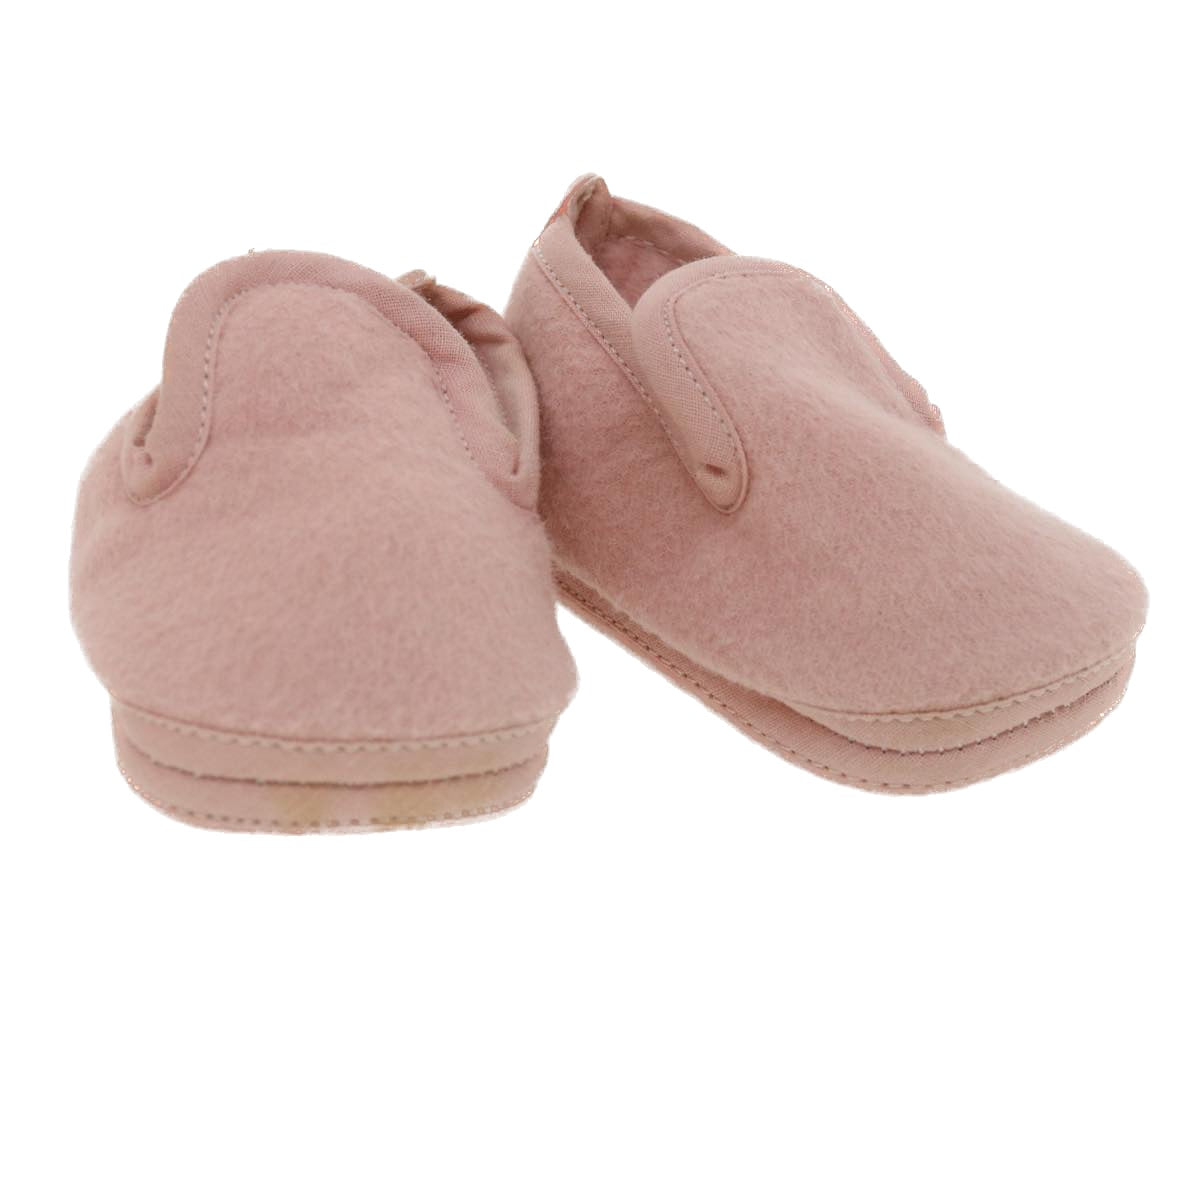 HERMES Baby Shoes Wool Pink Auth ar8794